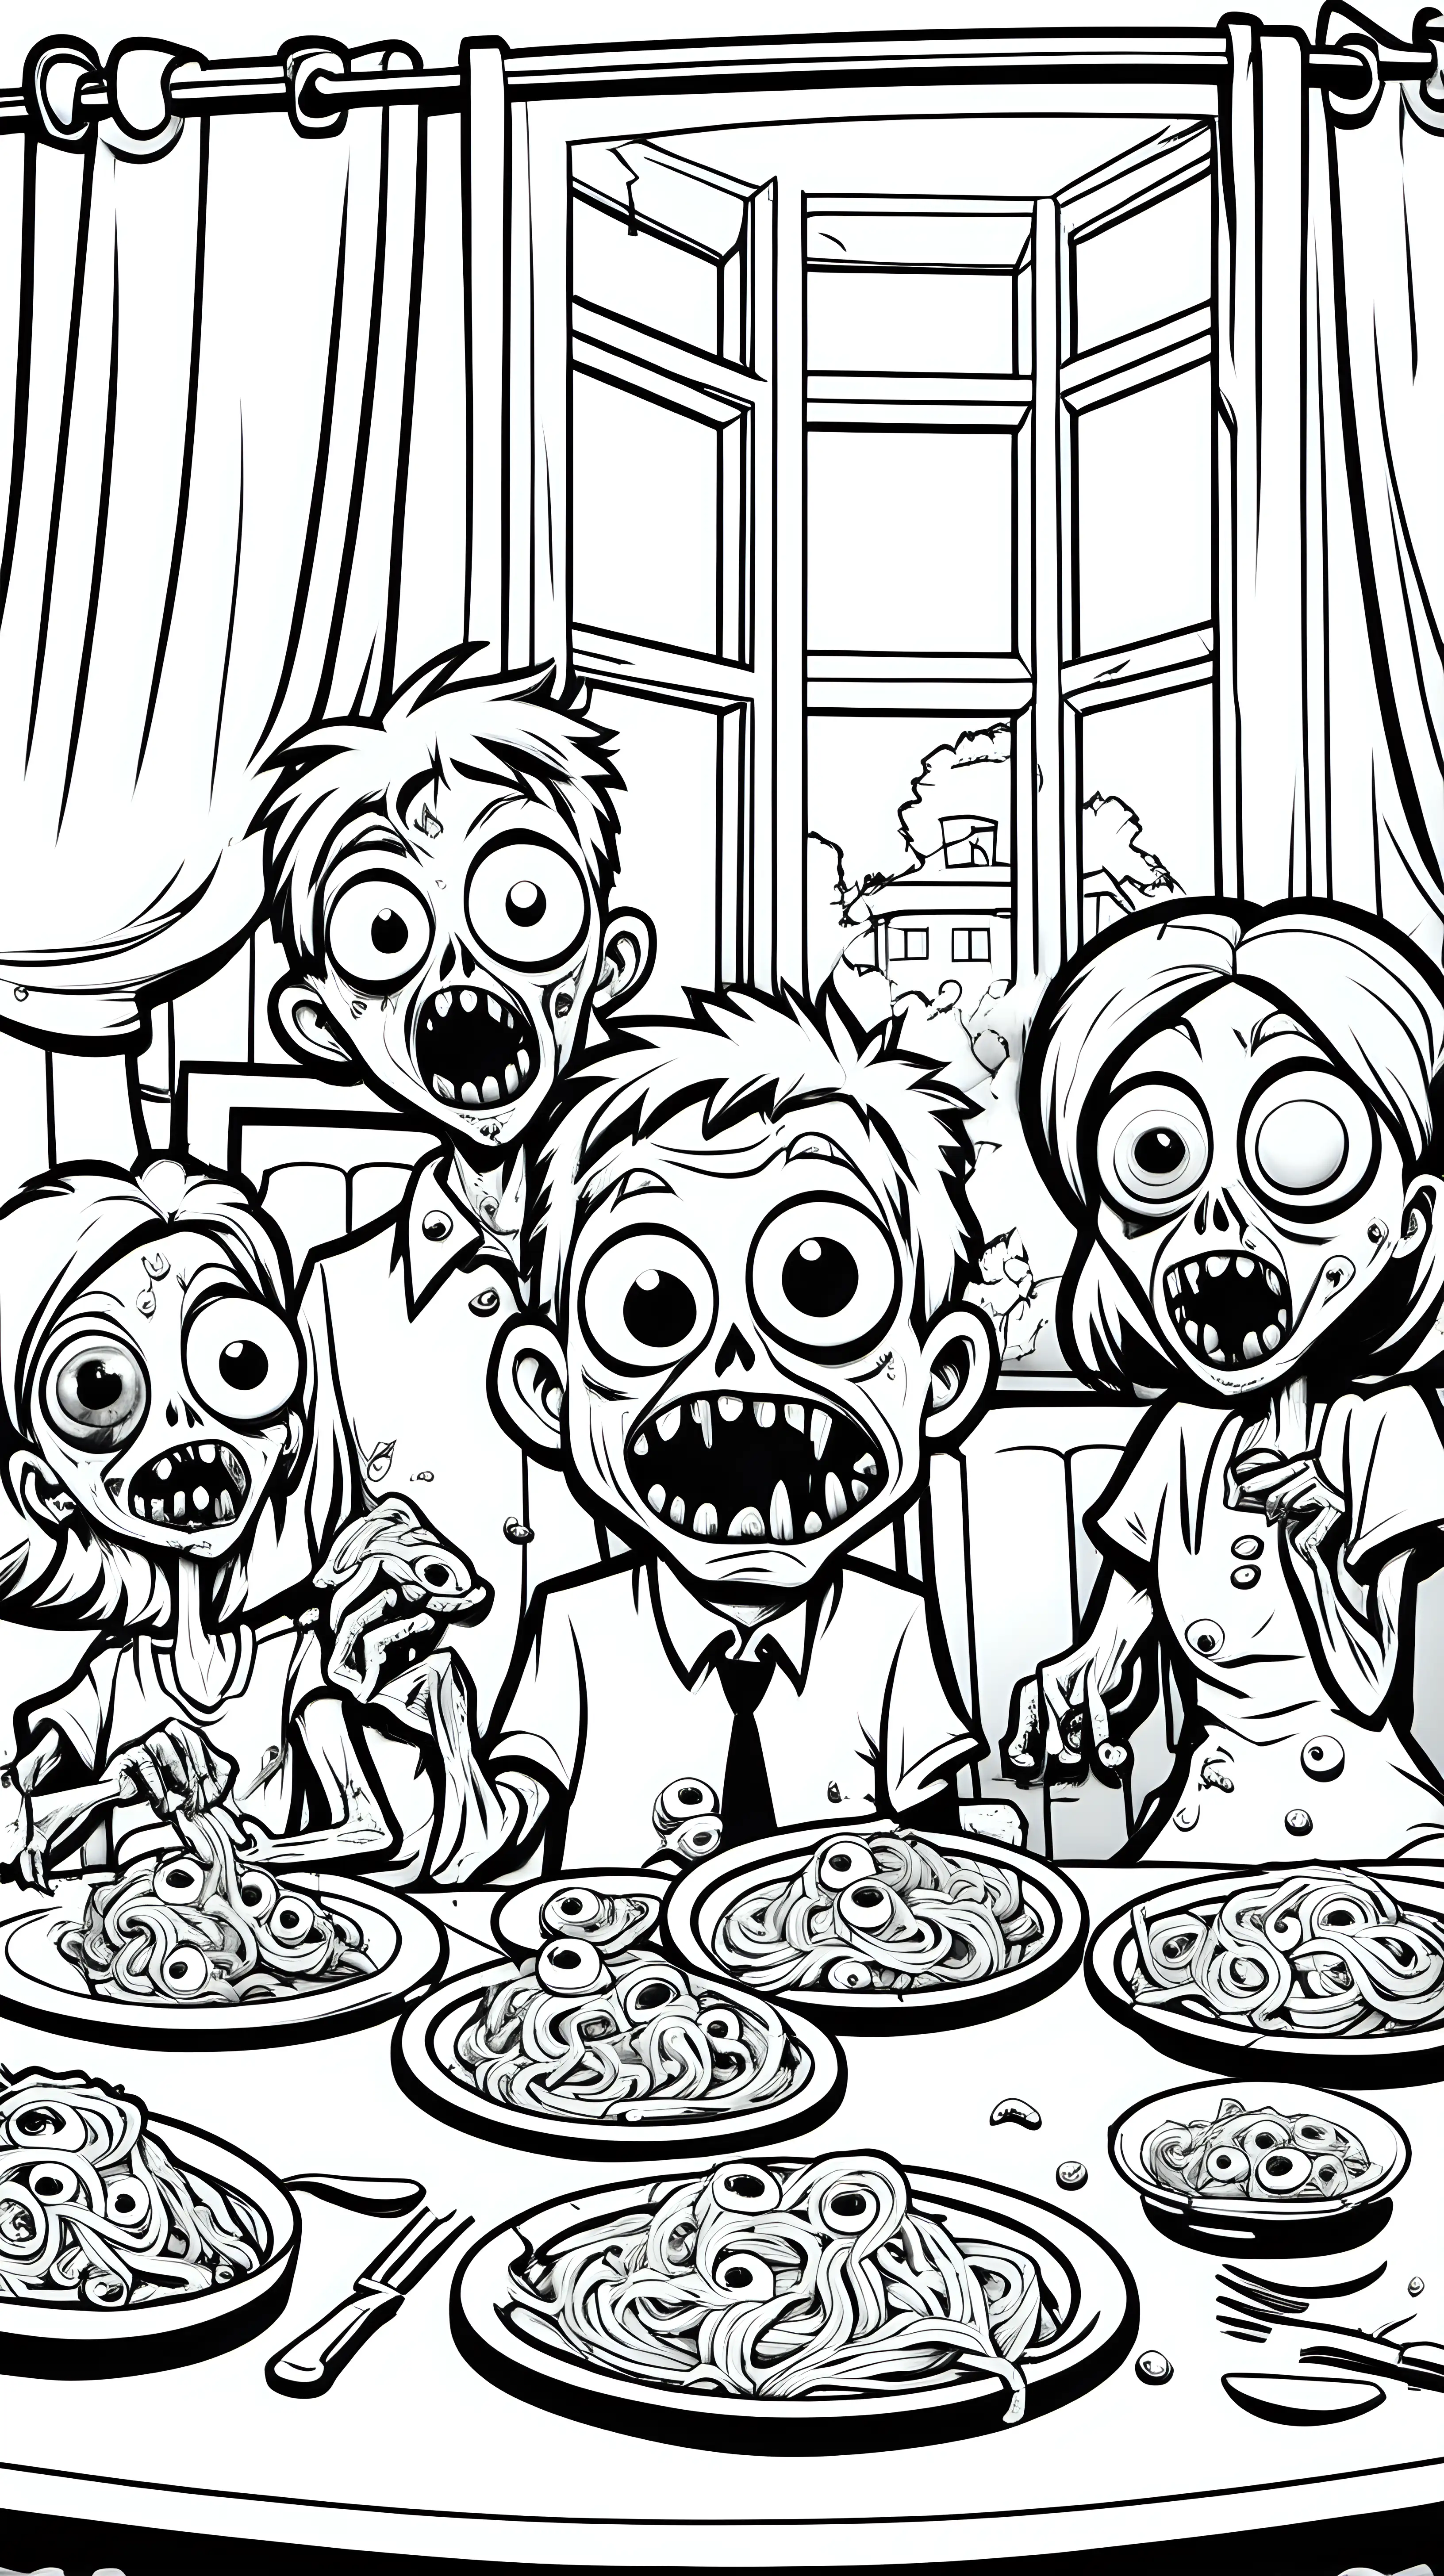 coloring book image, black and white image, of cute funny zombie family in dining room eating pasta with eyeballs